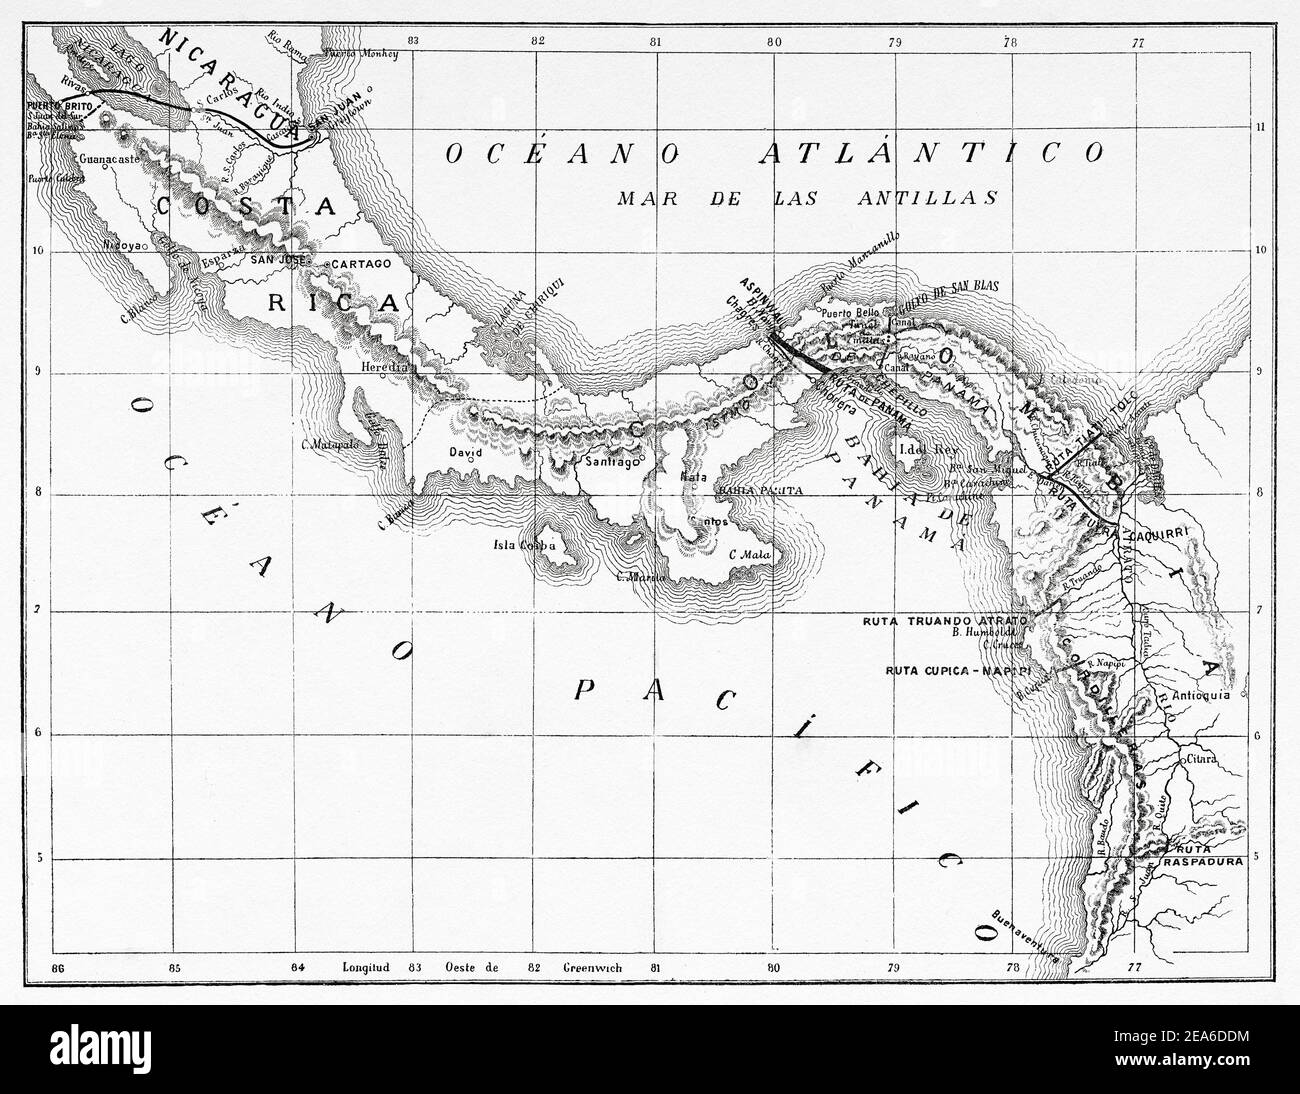 Old map of Central America. Panama canal route. Wyse Route. Lucien Napoleon Bonaparte Wyse (1845-1909) was a French engineer, commissioned to examine the different possible routes for future excavations of the Panama Canal. Central America. Old 19th century engraved illustration from El Mundo Ilustrado 1879 Stock Photo